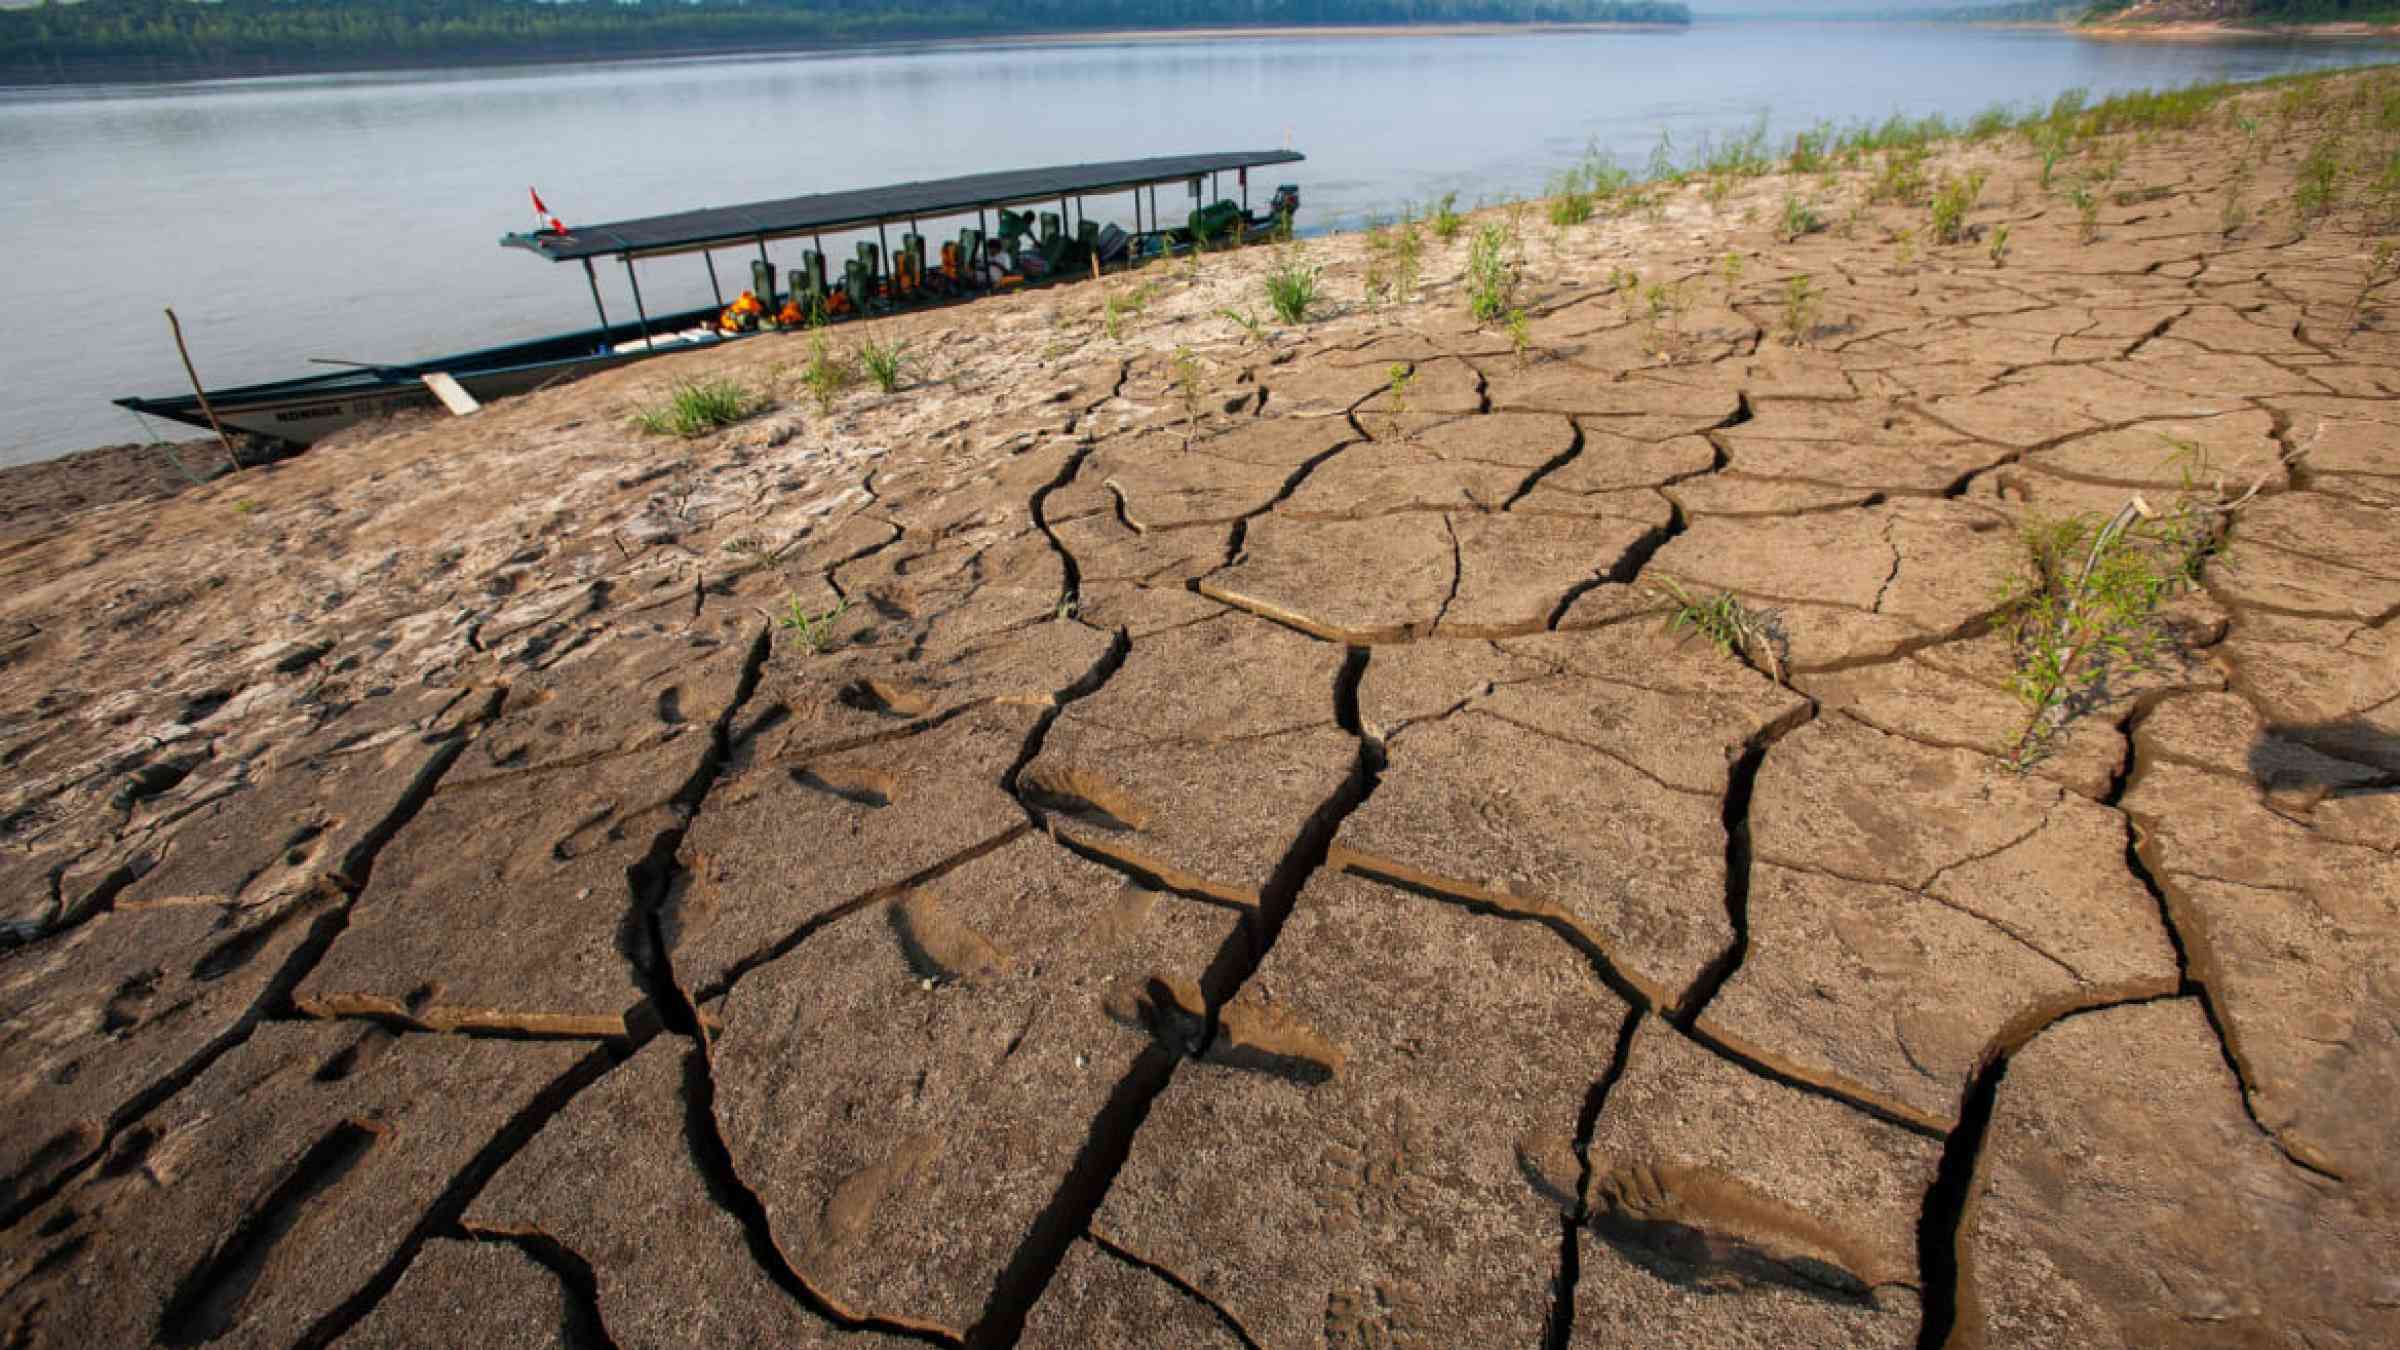 The Tambopata River, a tiny tributary of the Amazon river system, is afflicted by drought